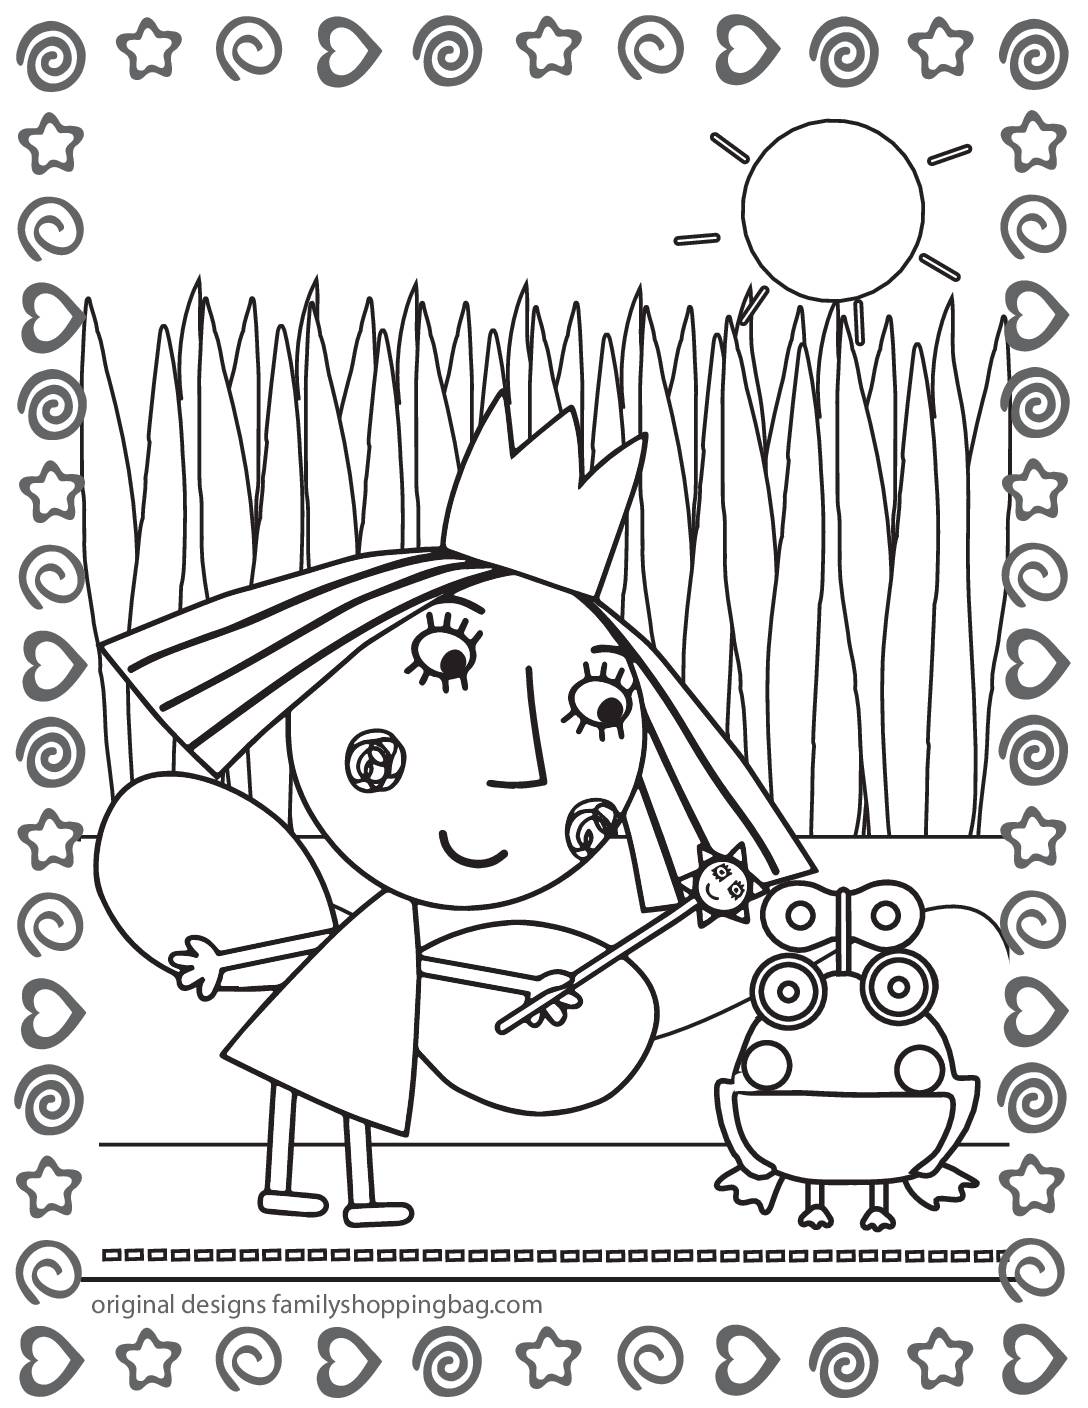 Coloring Page 4 Ben & Holly Coloring Pages